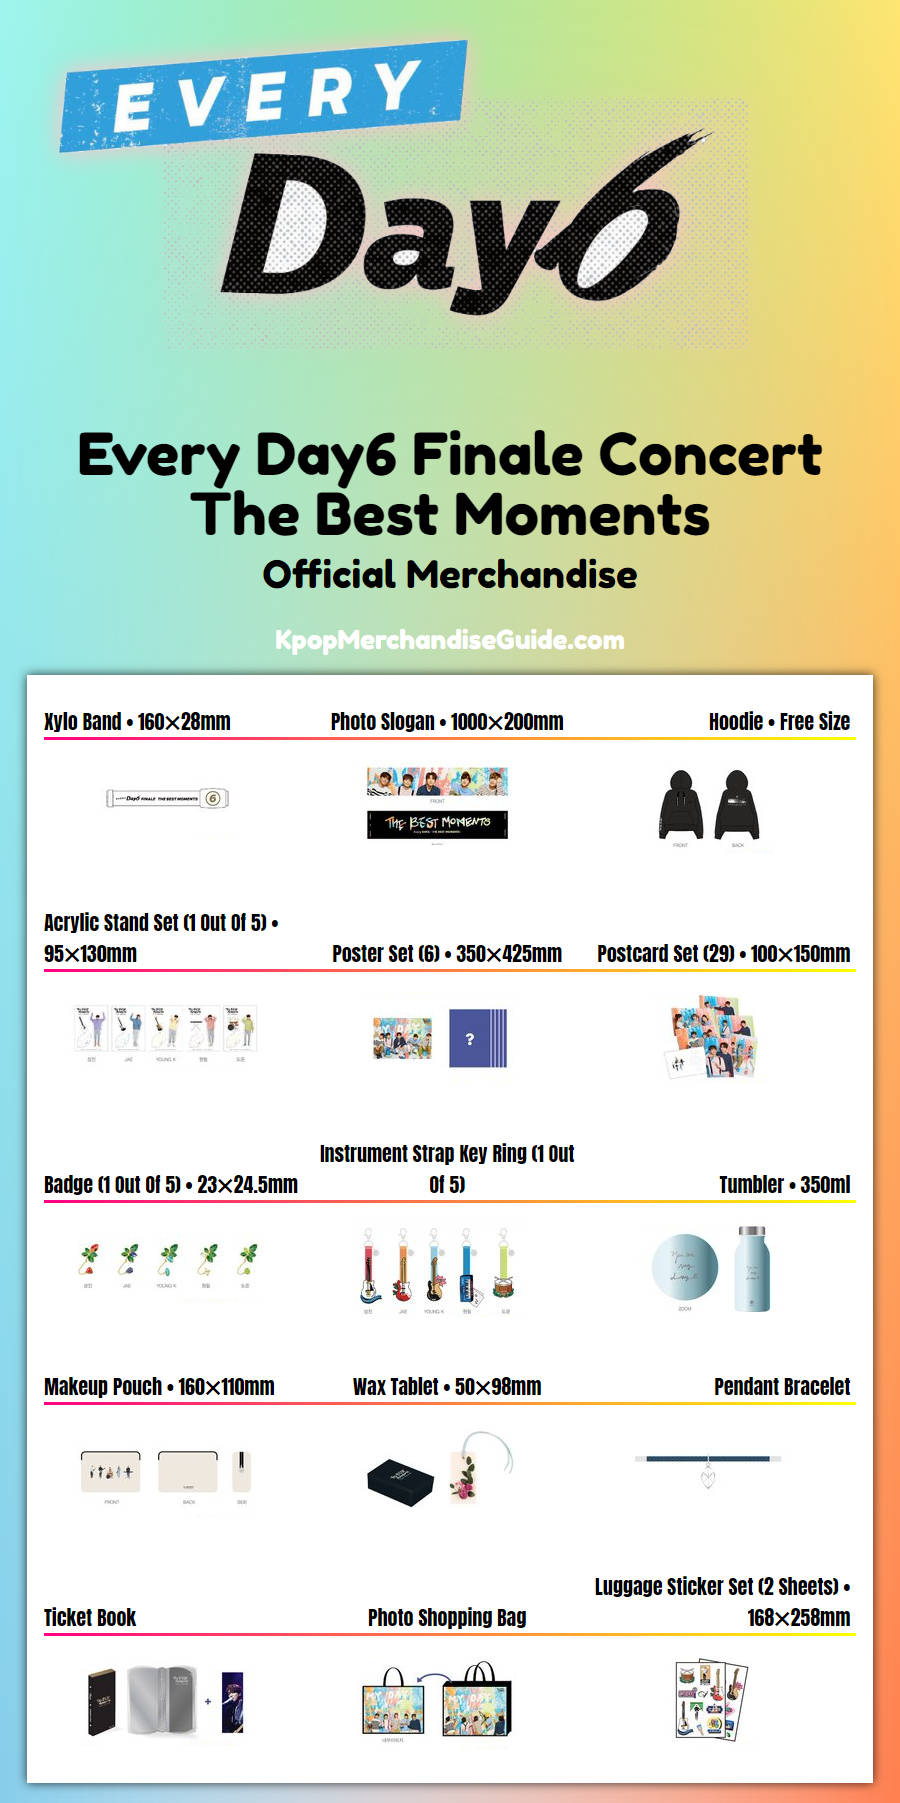 Every Day6 Finale Concert - The Best Moments Merchandise